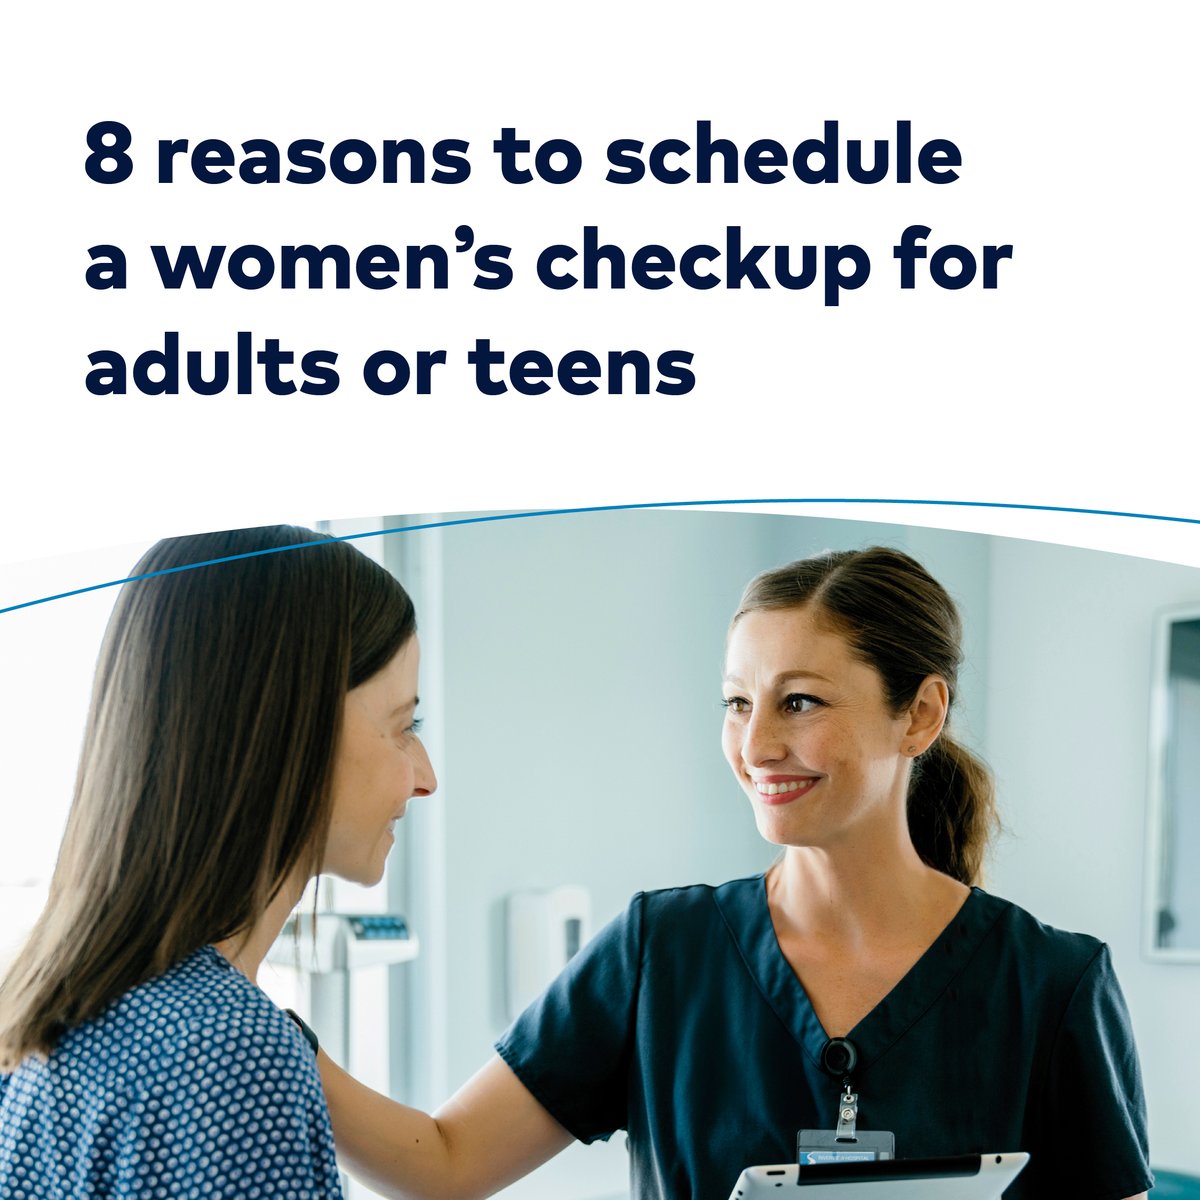 It can be tempting to see a doctor only when something is wrong, but annual checkups are a form of self-care and can prevent future health issues. On Women's Checkup Day, discover 8 reasons to schedule an appointment: bit.ly/4dFEhr3 #HealthierTomorrows #WomensHealth